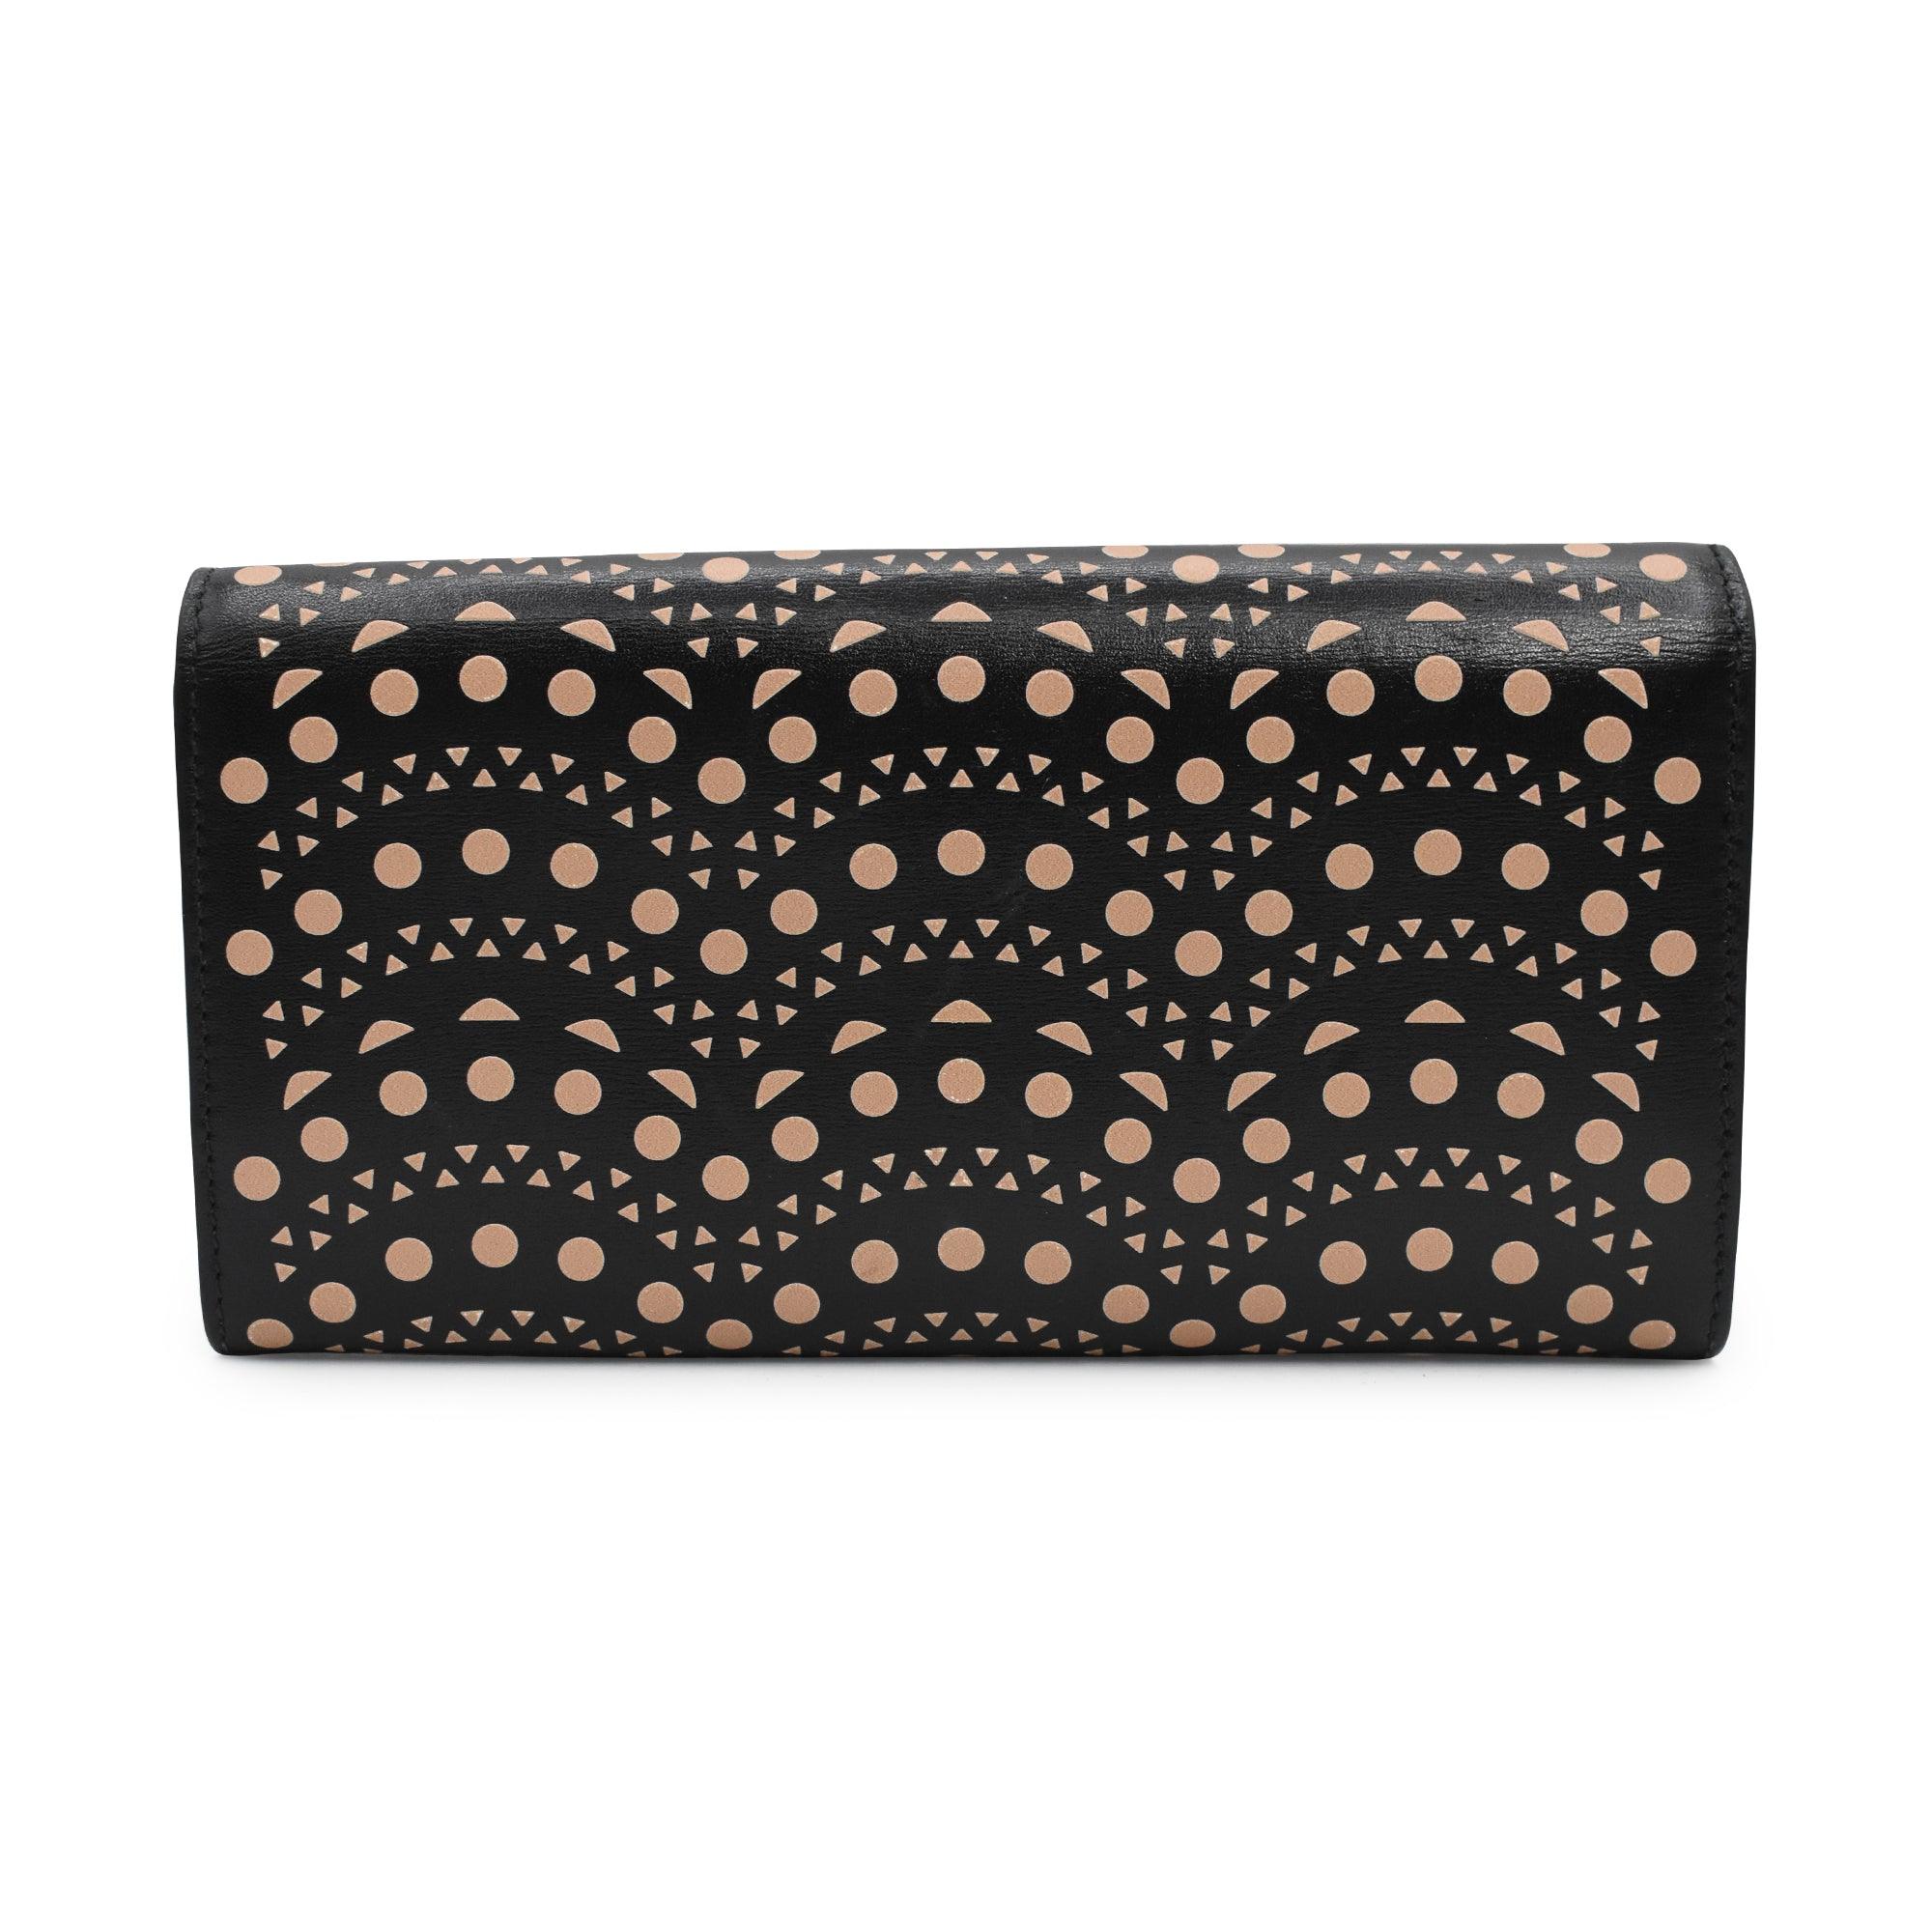 Alaia Envelope Wallet - Fashionably Yours